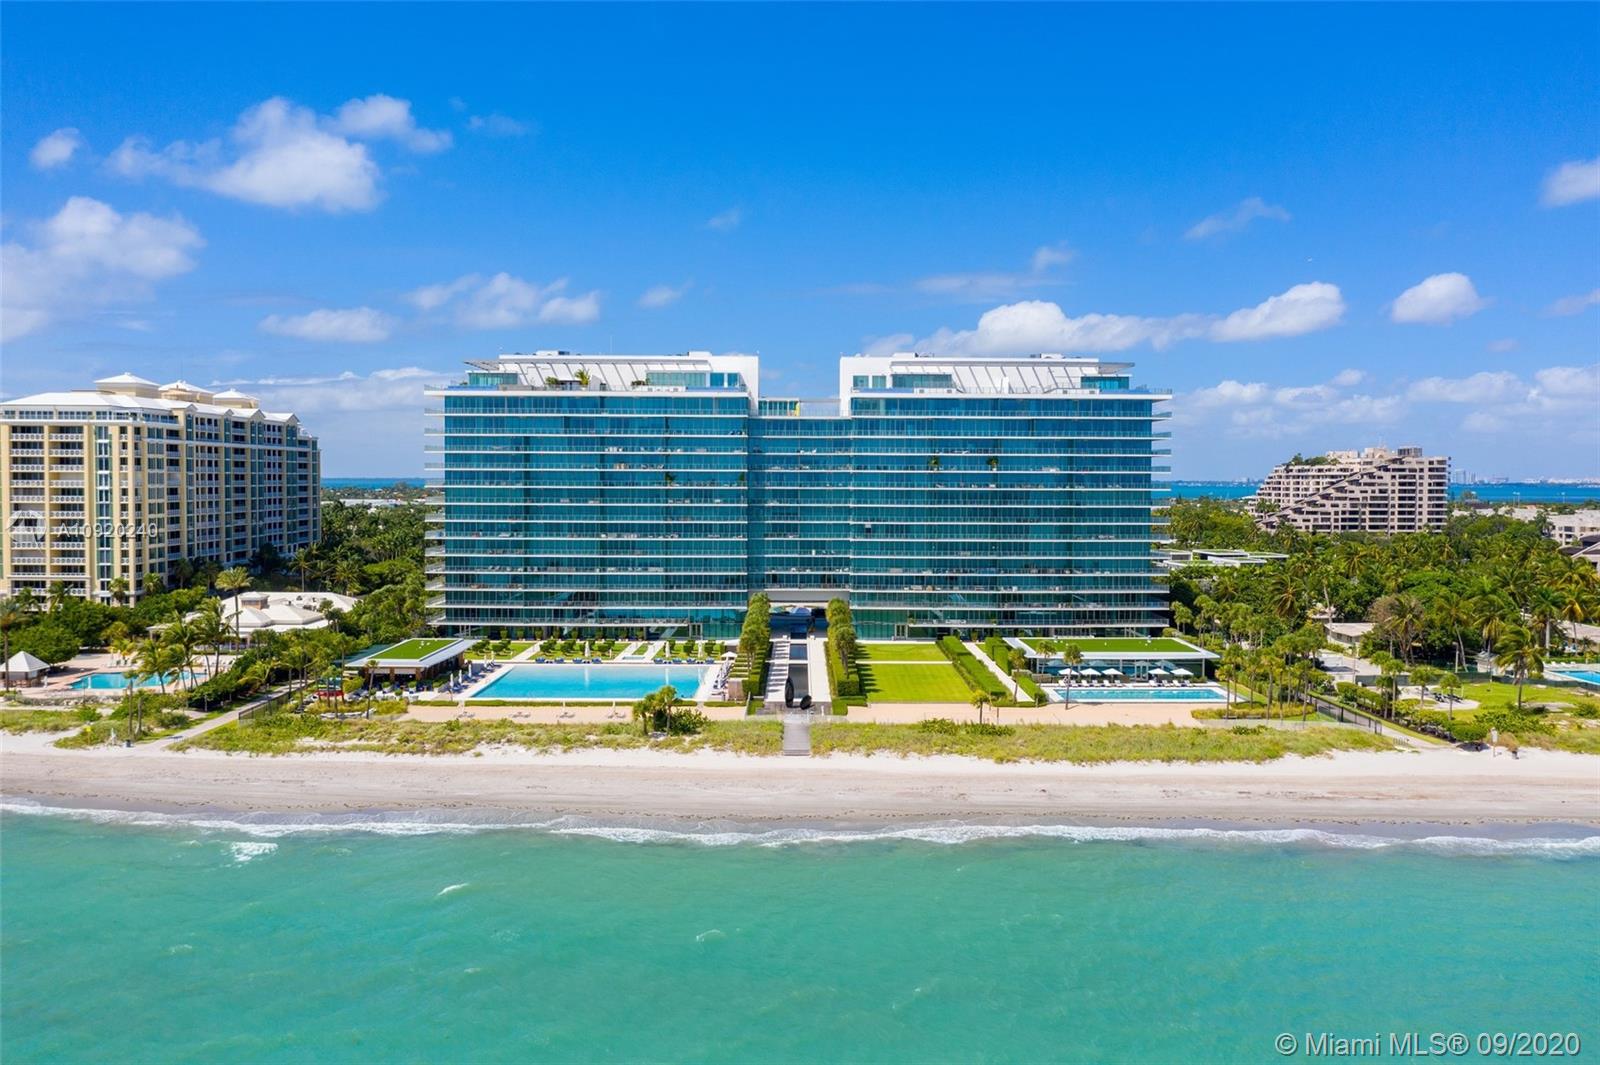 Step inside this one-of-a kind luxury beach front property featuring 2B | 2.5BA | 1 Den | 1,837 SF living area with unobstructed and breathtaking direct ocean views from every room. This apartment features a design and furniture package by Artefacto, and it is being offered fully furnished.  The entire apartment has been completely remodeled. Marble floors throughout, high ceilings, electric shades, electric toilets, floor to ceiling impact windows and sliding doors which open to a 452 SF wrap around balcony overlooking the ocean. The kitchen features quartz counter tops, double oven, wine cooler, Miele appliances, and Euro-style cabinets. Private elevator, two parking spaces, exclusive resort-style amenities including beach front services, gym, spa, sauna, tennis courts, and restaurant.